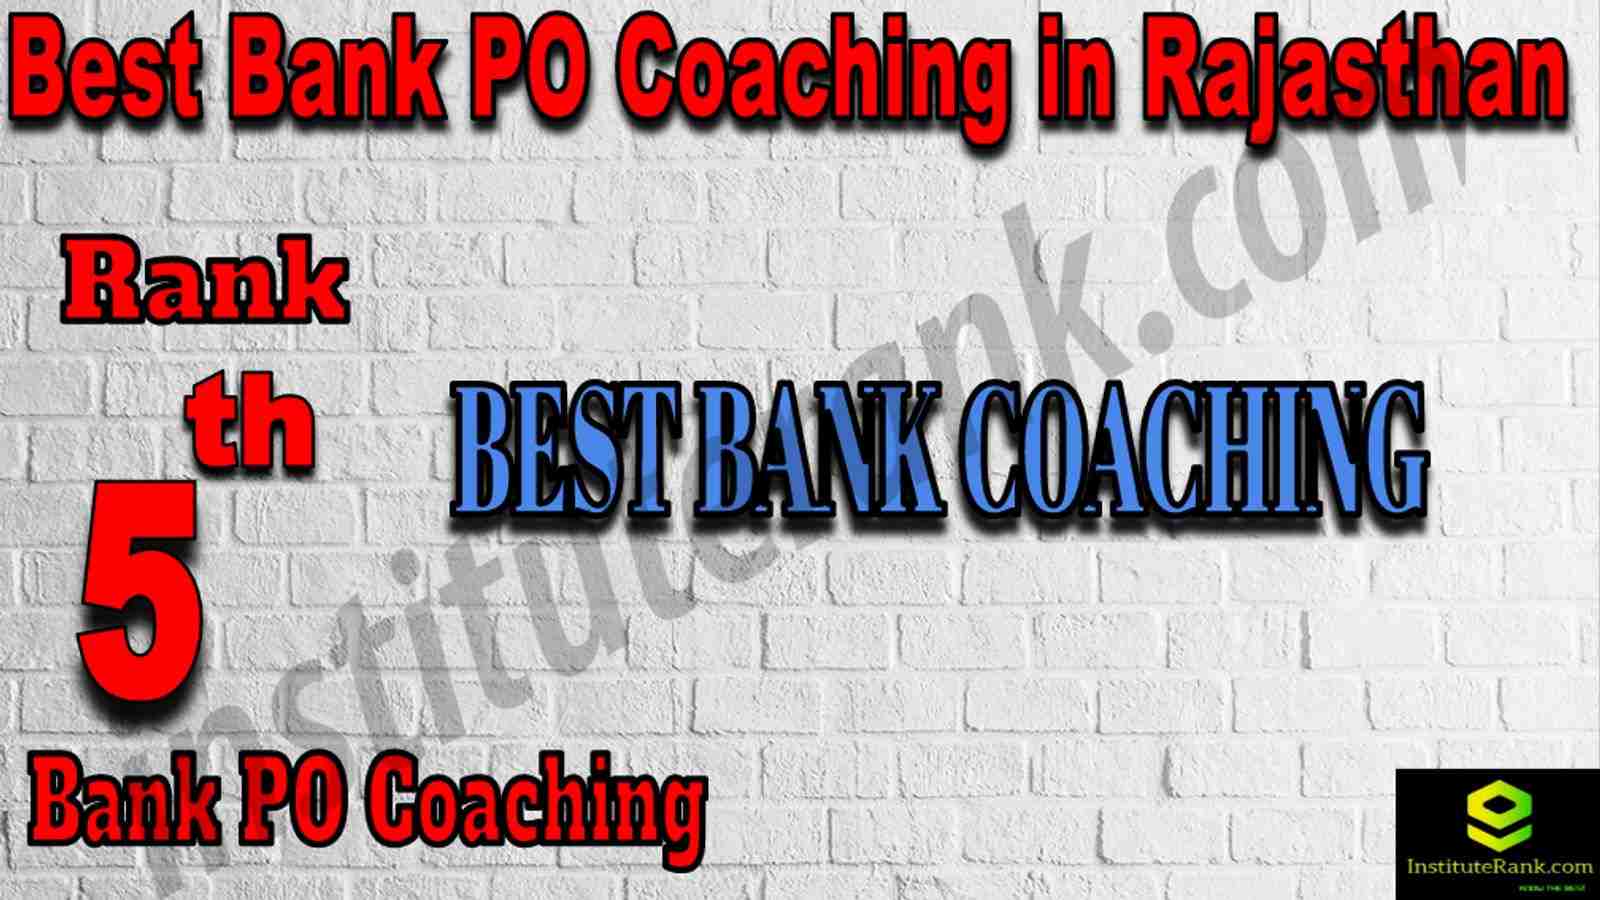 5th Best Bank PO Coaching in Rajasthan